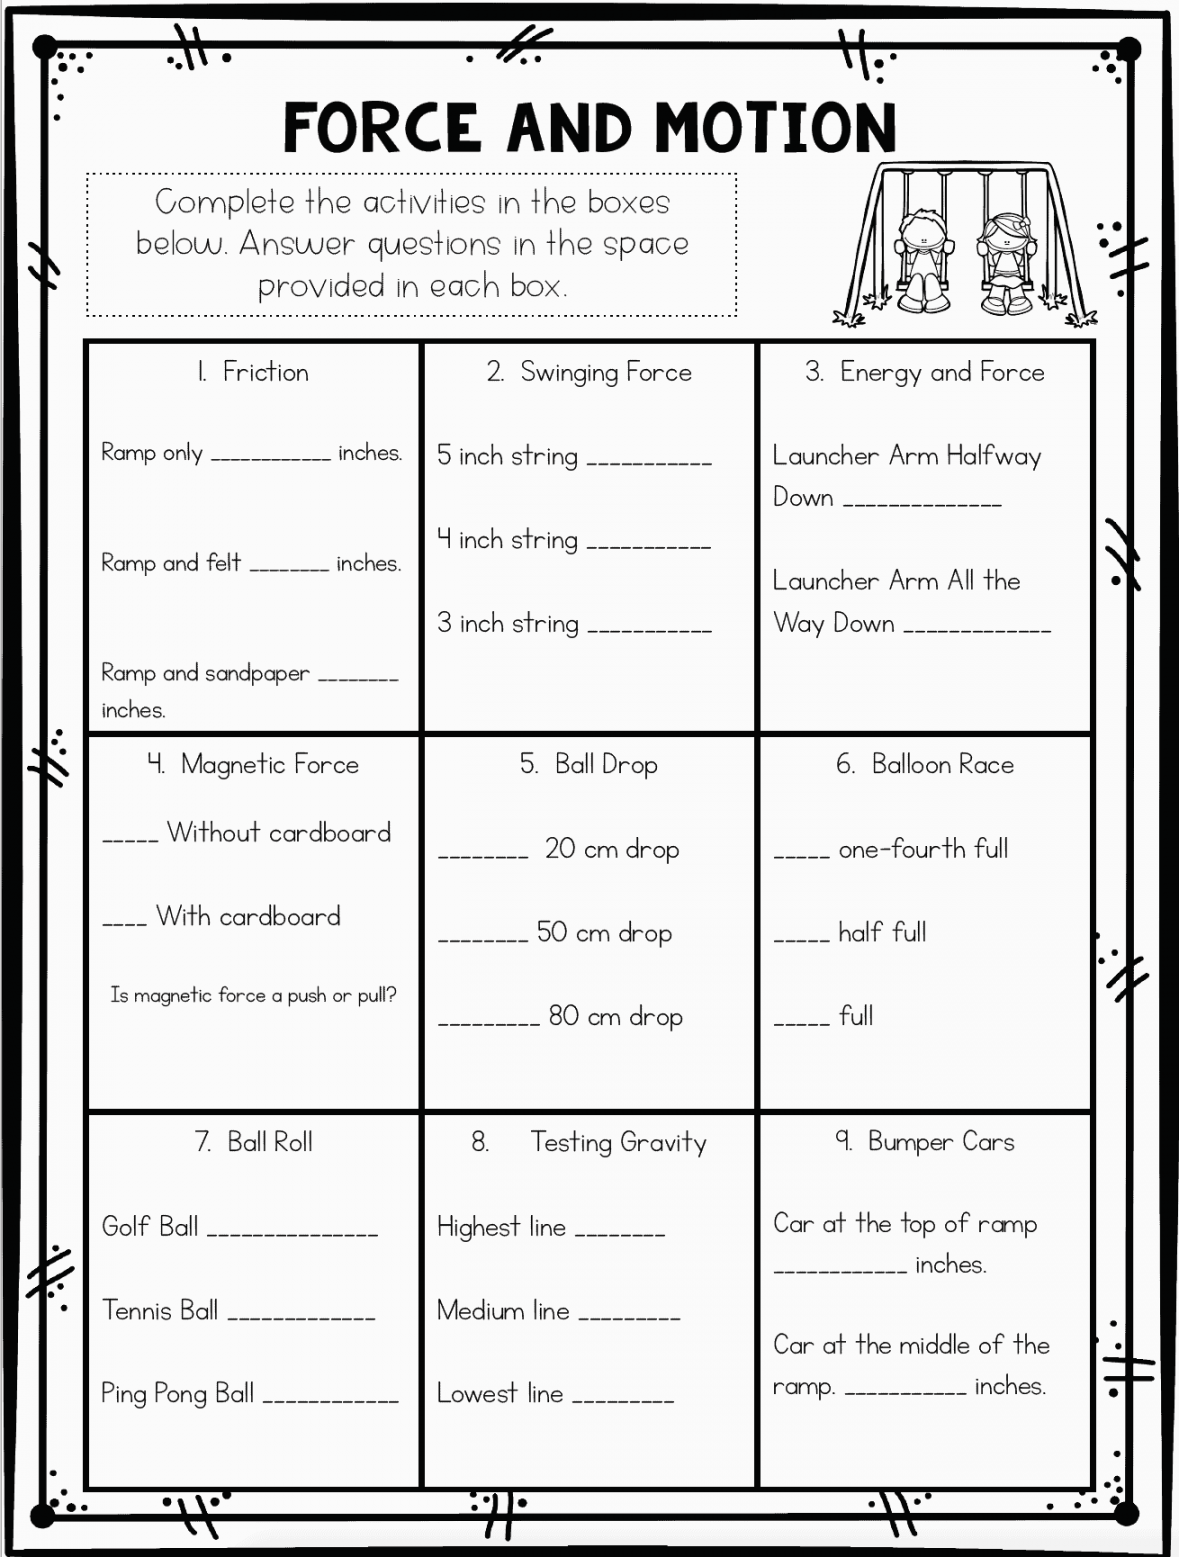 Force and Motion Worksheets & Stations - Ashleigh